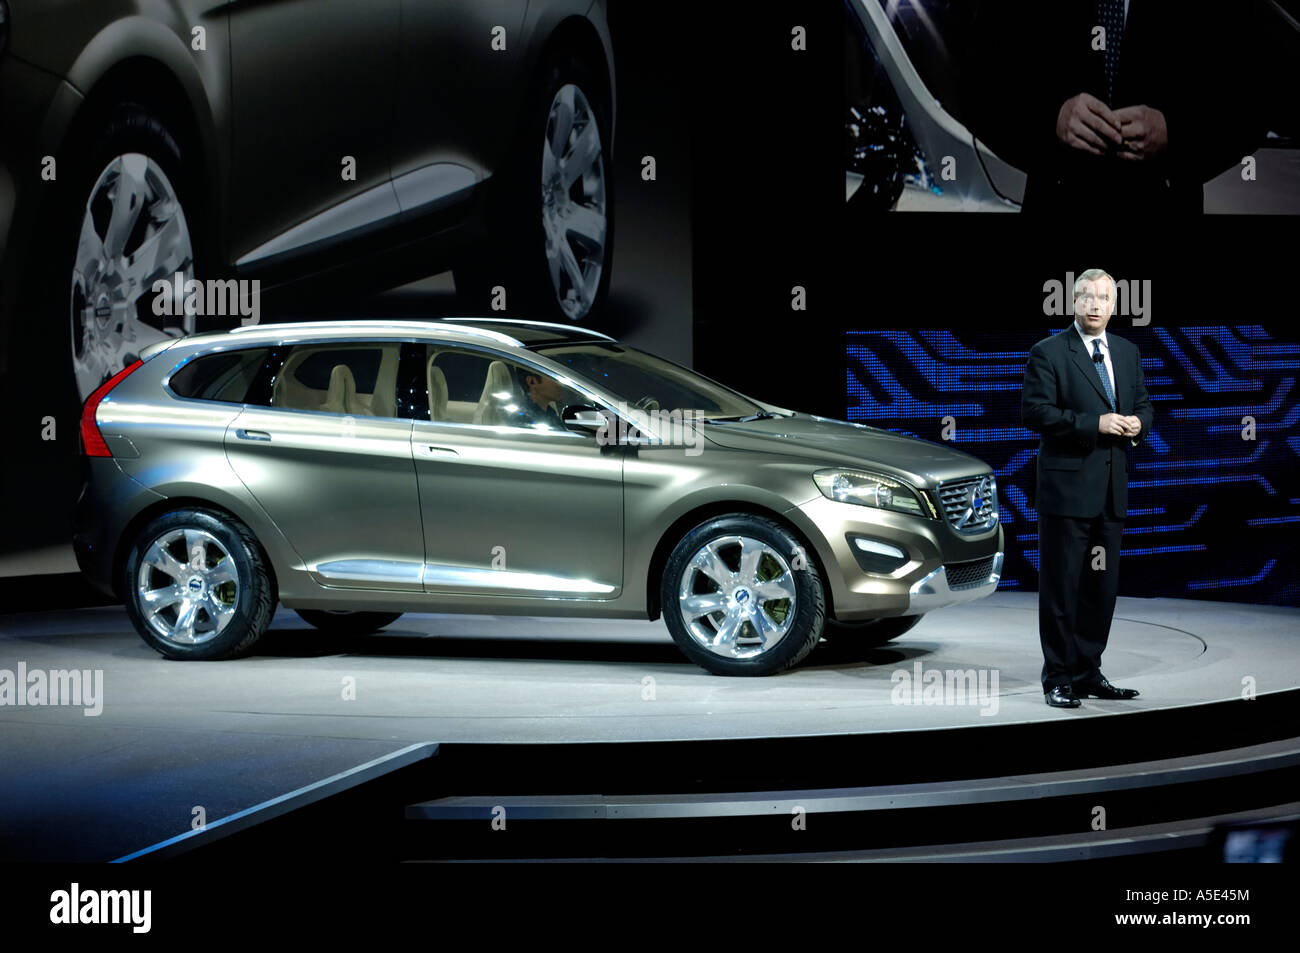 Volvo President and CEO Fredrik Arp at the unveiling of the Volvo XC60 at the North American International Auto Show 2007 Stock Photo